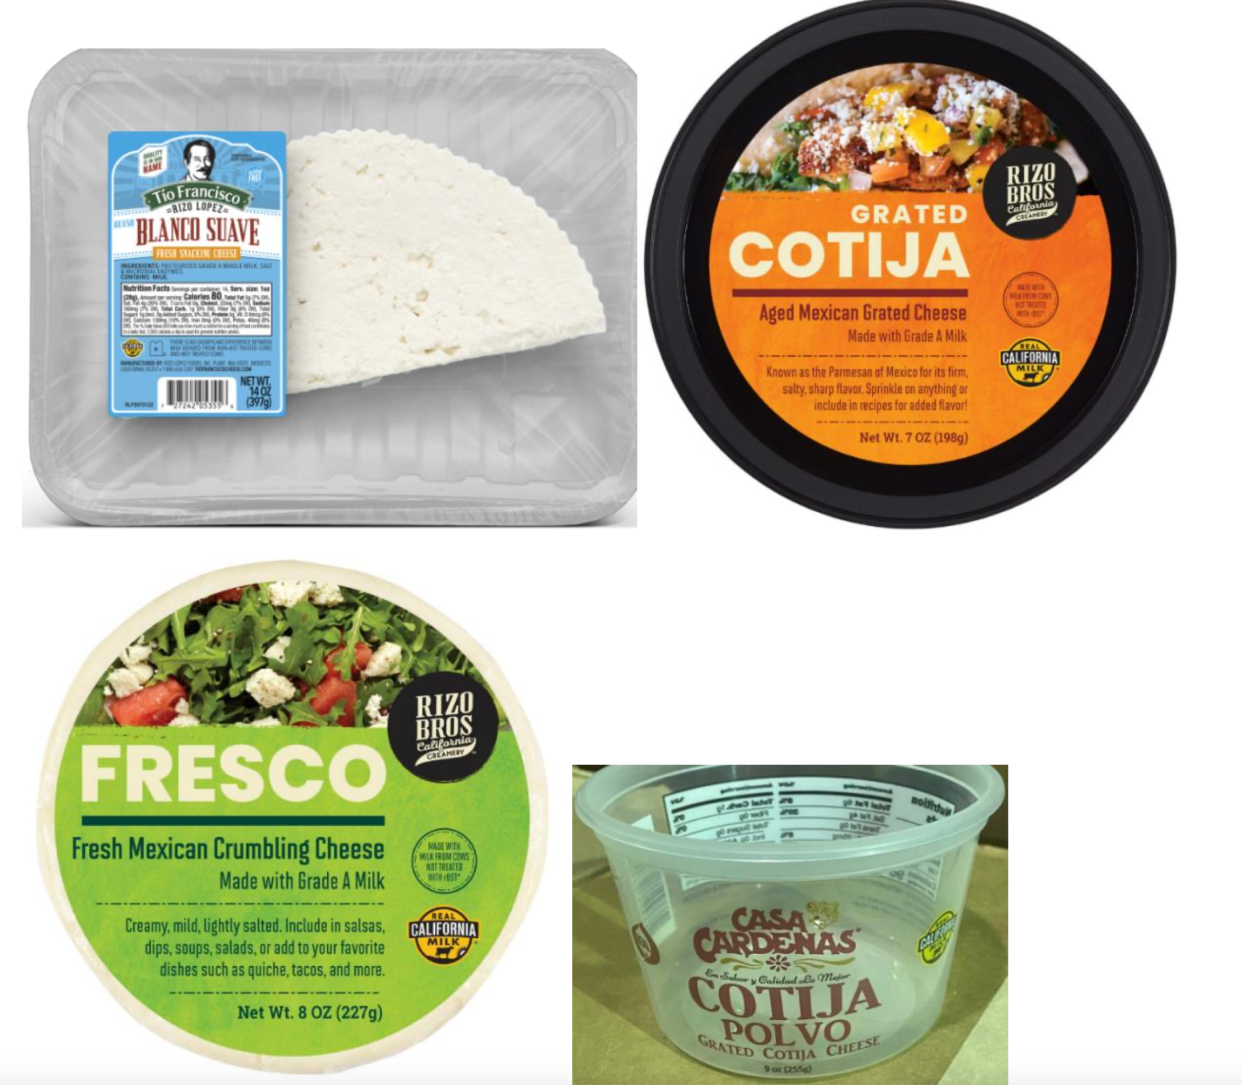 Rizo-López Foods is voluntarily recalling its dairy products listed below because they have the potential to be contaminated with Listeria monocytogenes